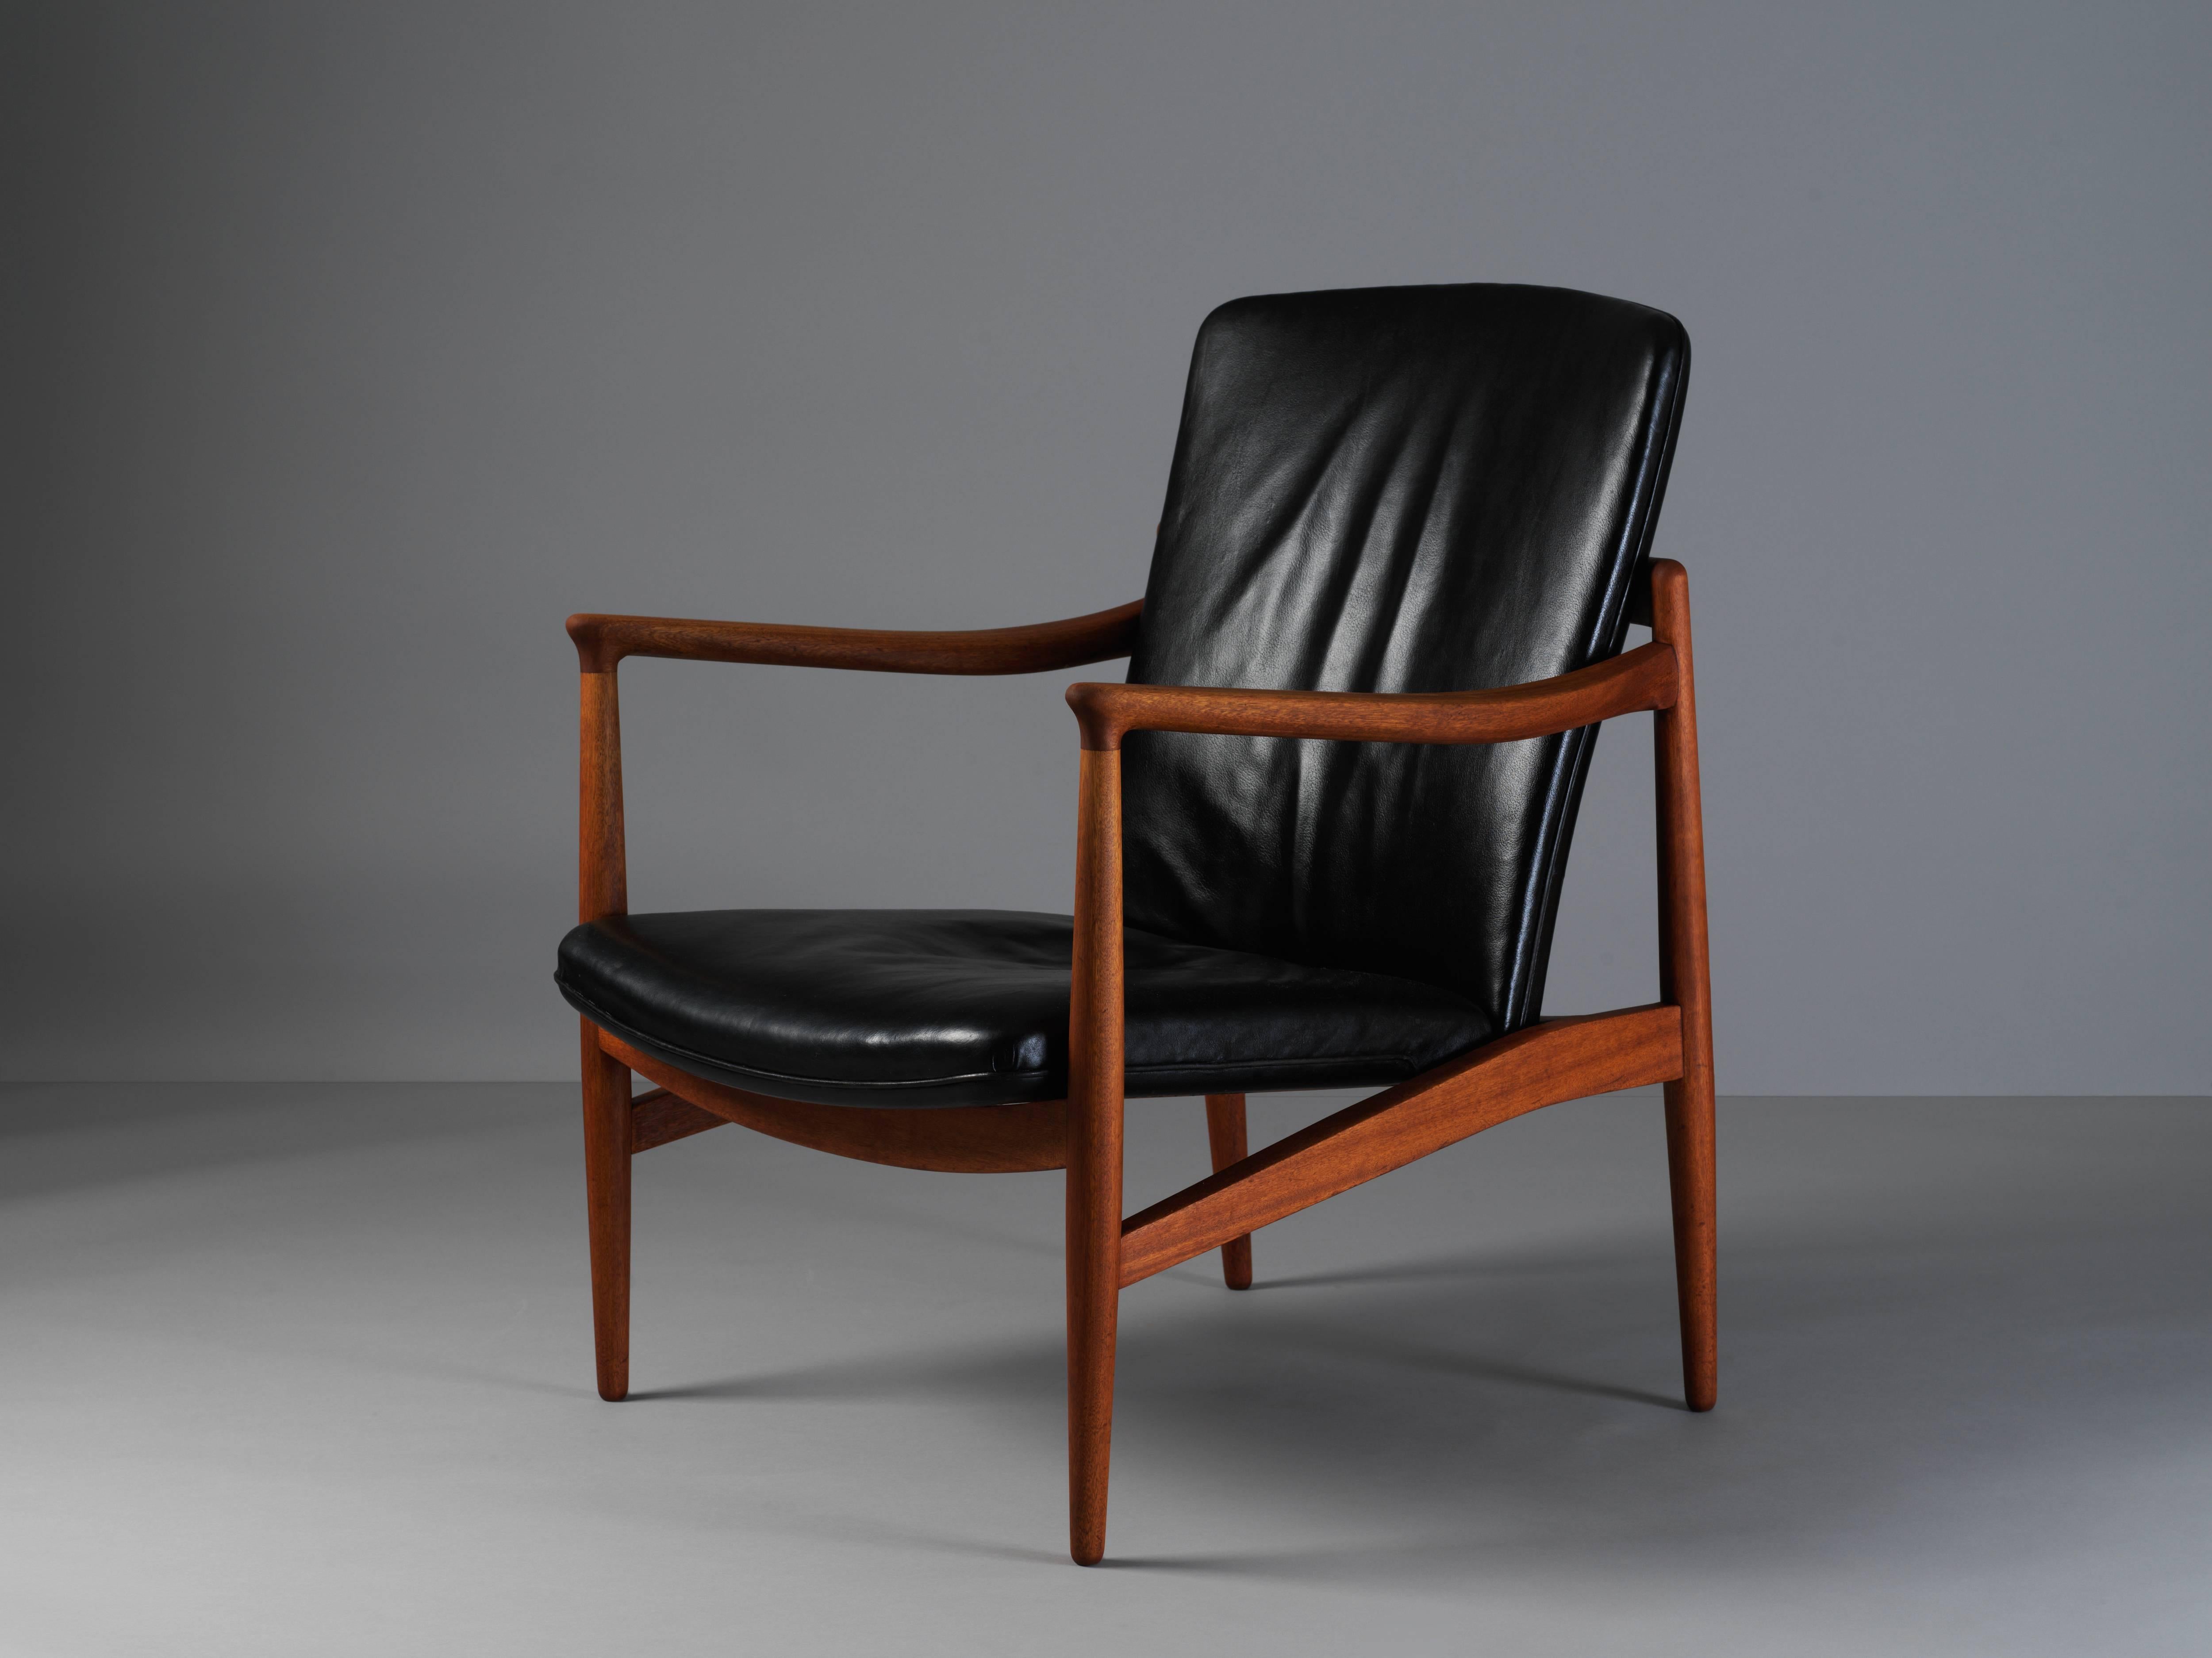 A lounge chair by Danish cabinet maker and modernist pioneer, Jacob Kjaer, designed in 1945. Handmade in teak and original black dyed leather. Carries manufacturer's label.

Jacob Kjaer also executed furniture designs for other creators such as